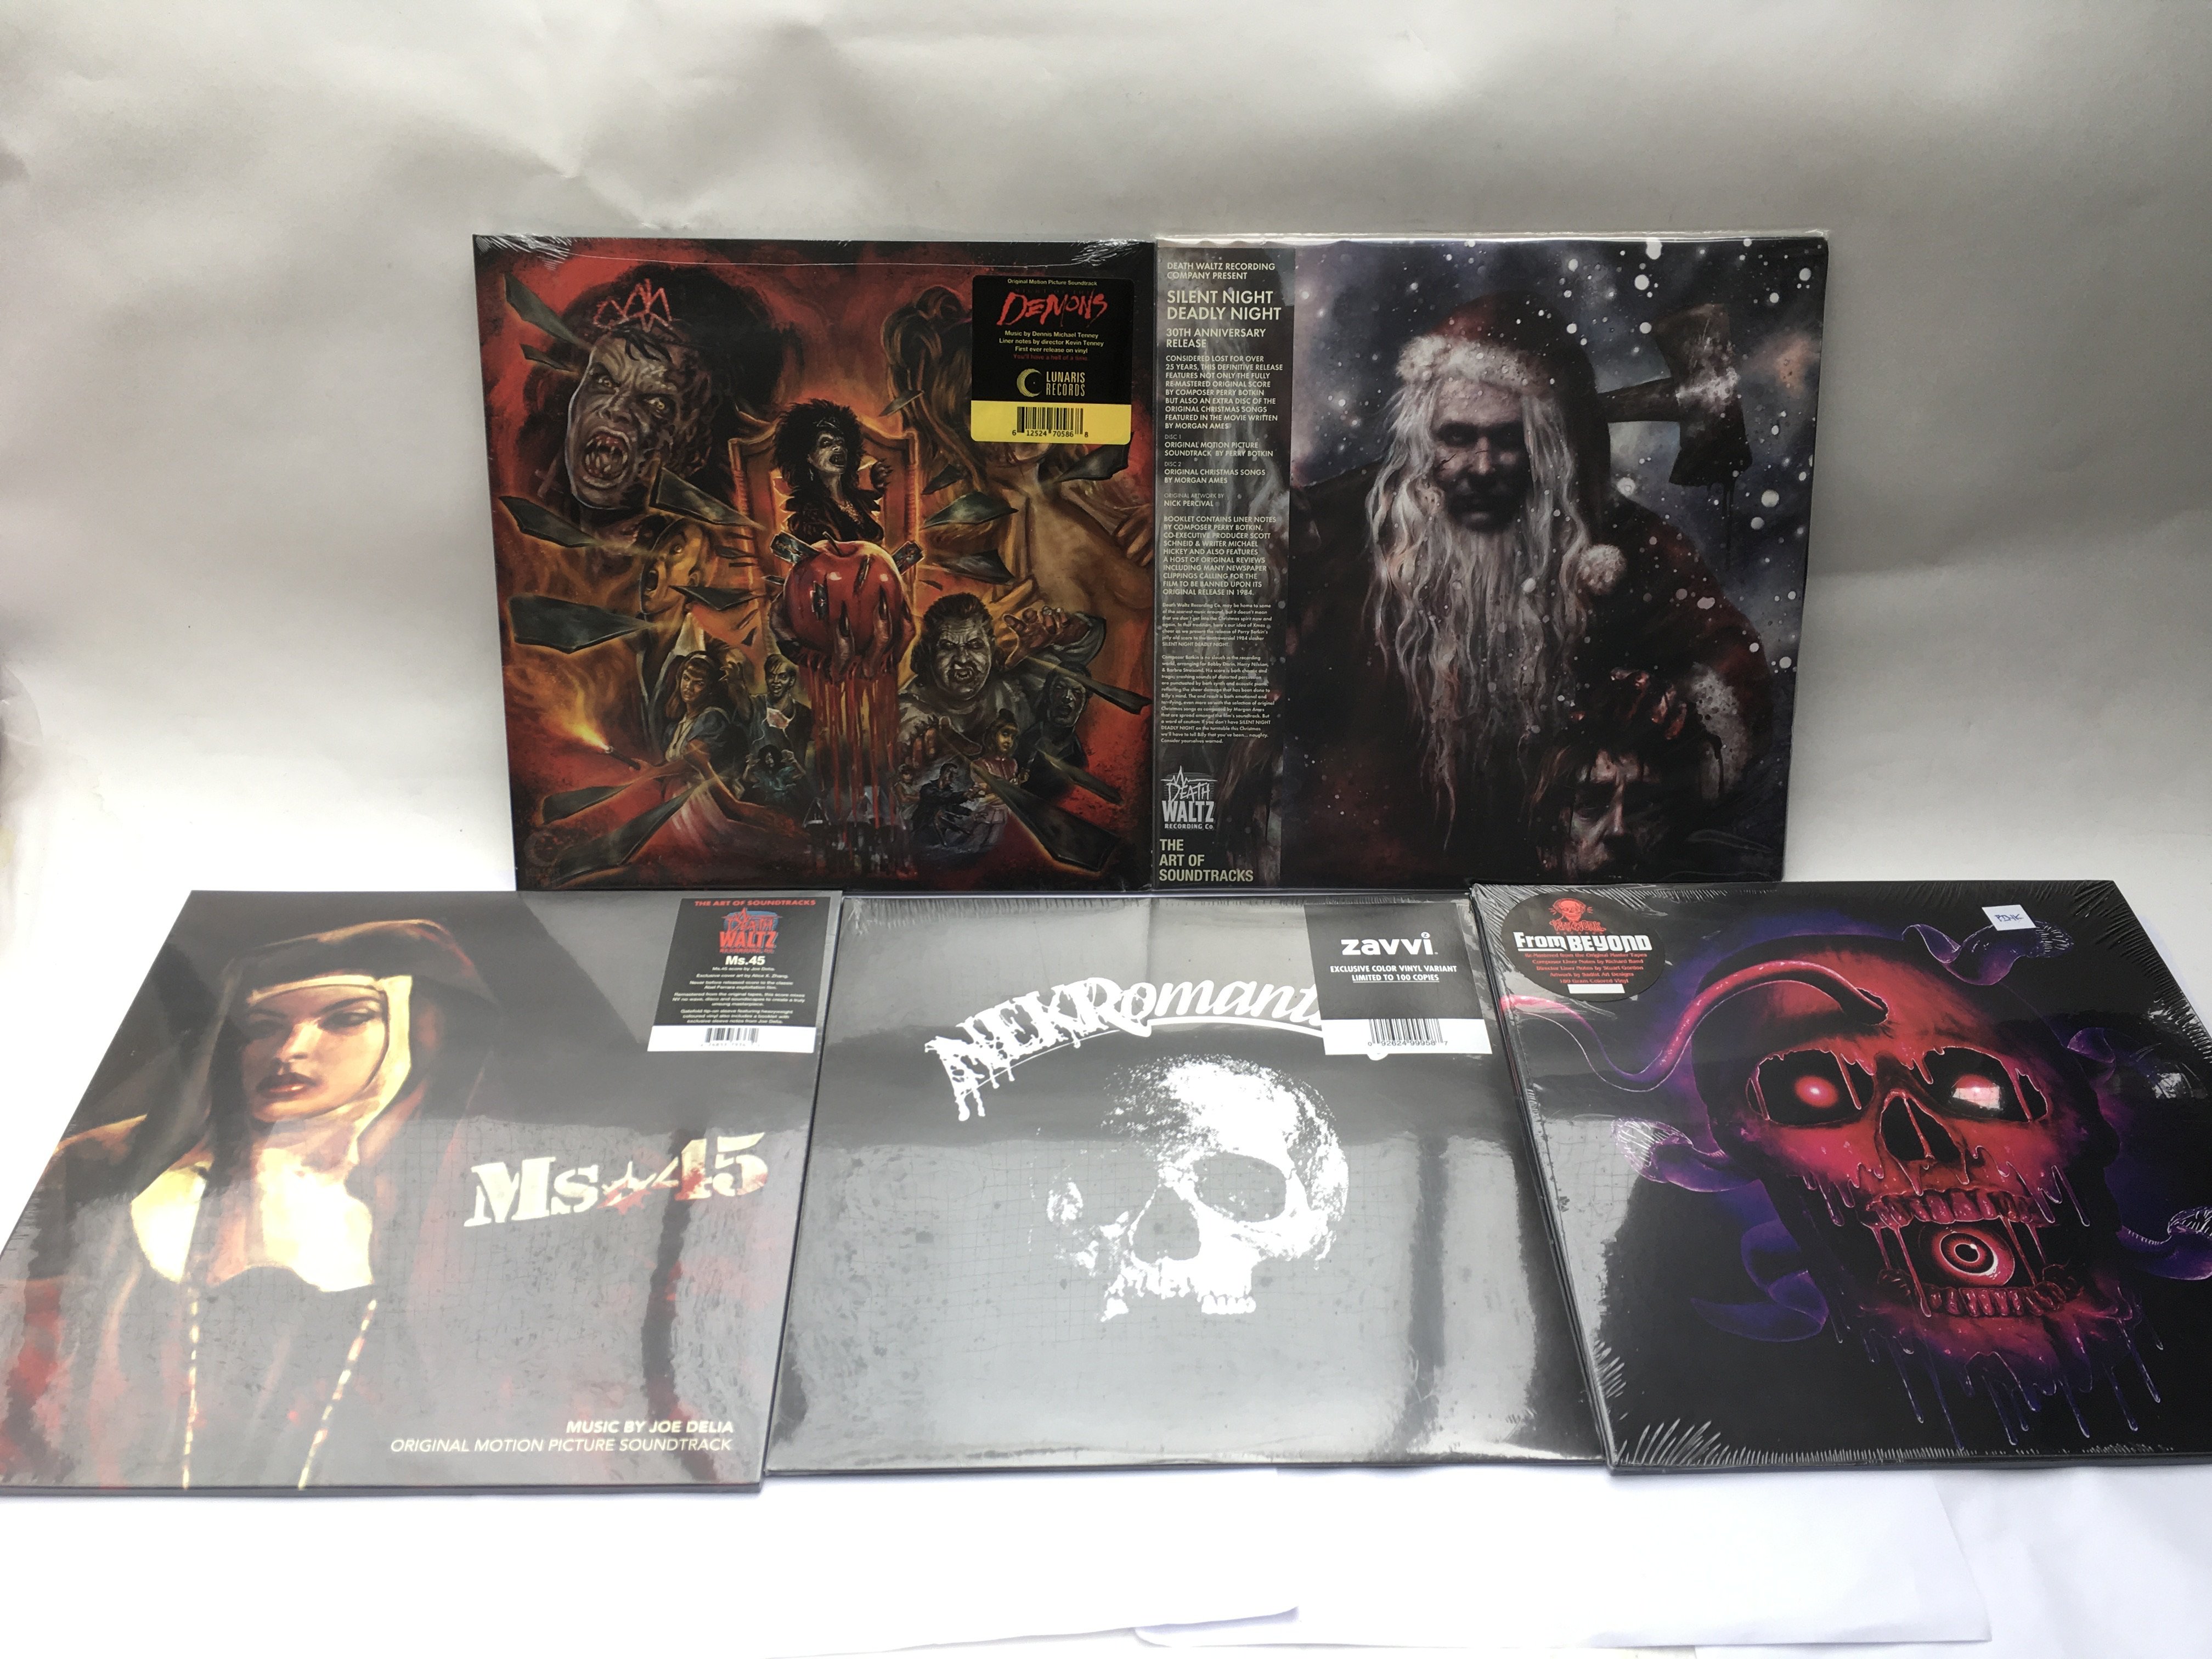 Five sealed and mint 180g soundtrack LPs including